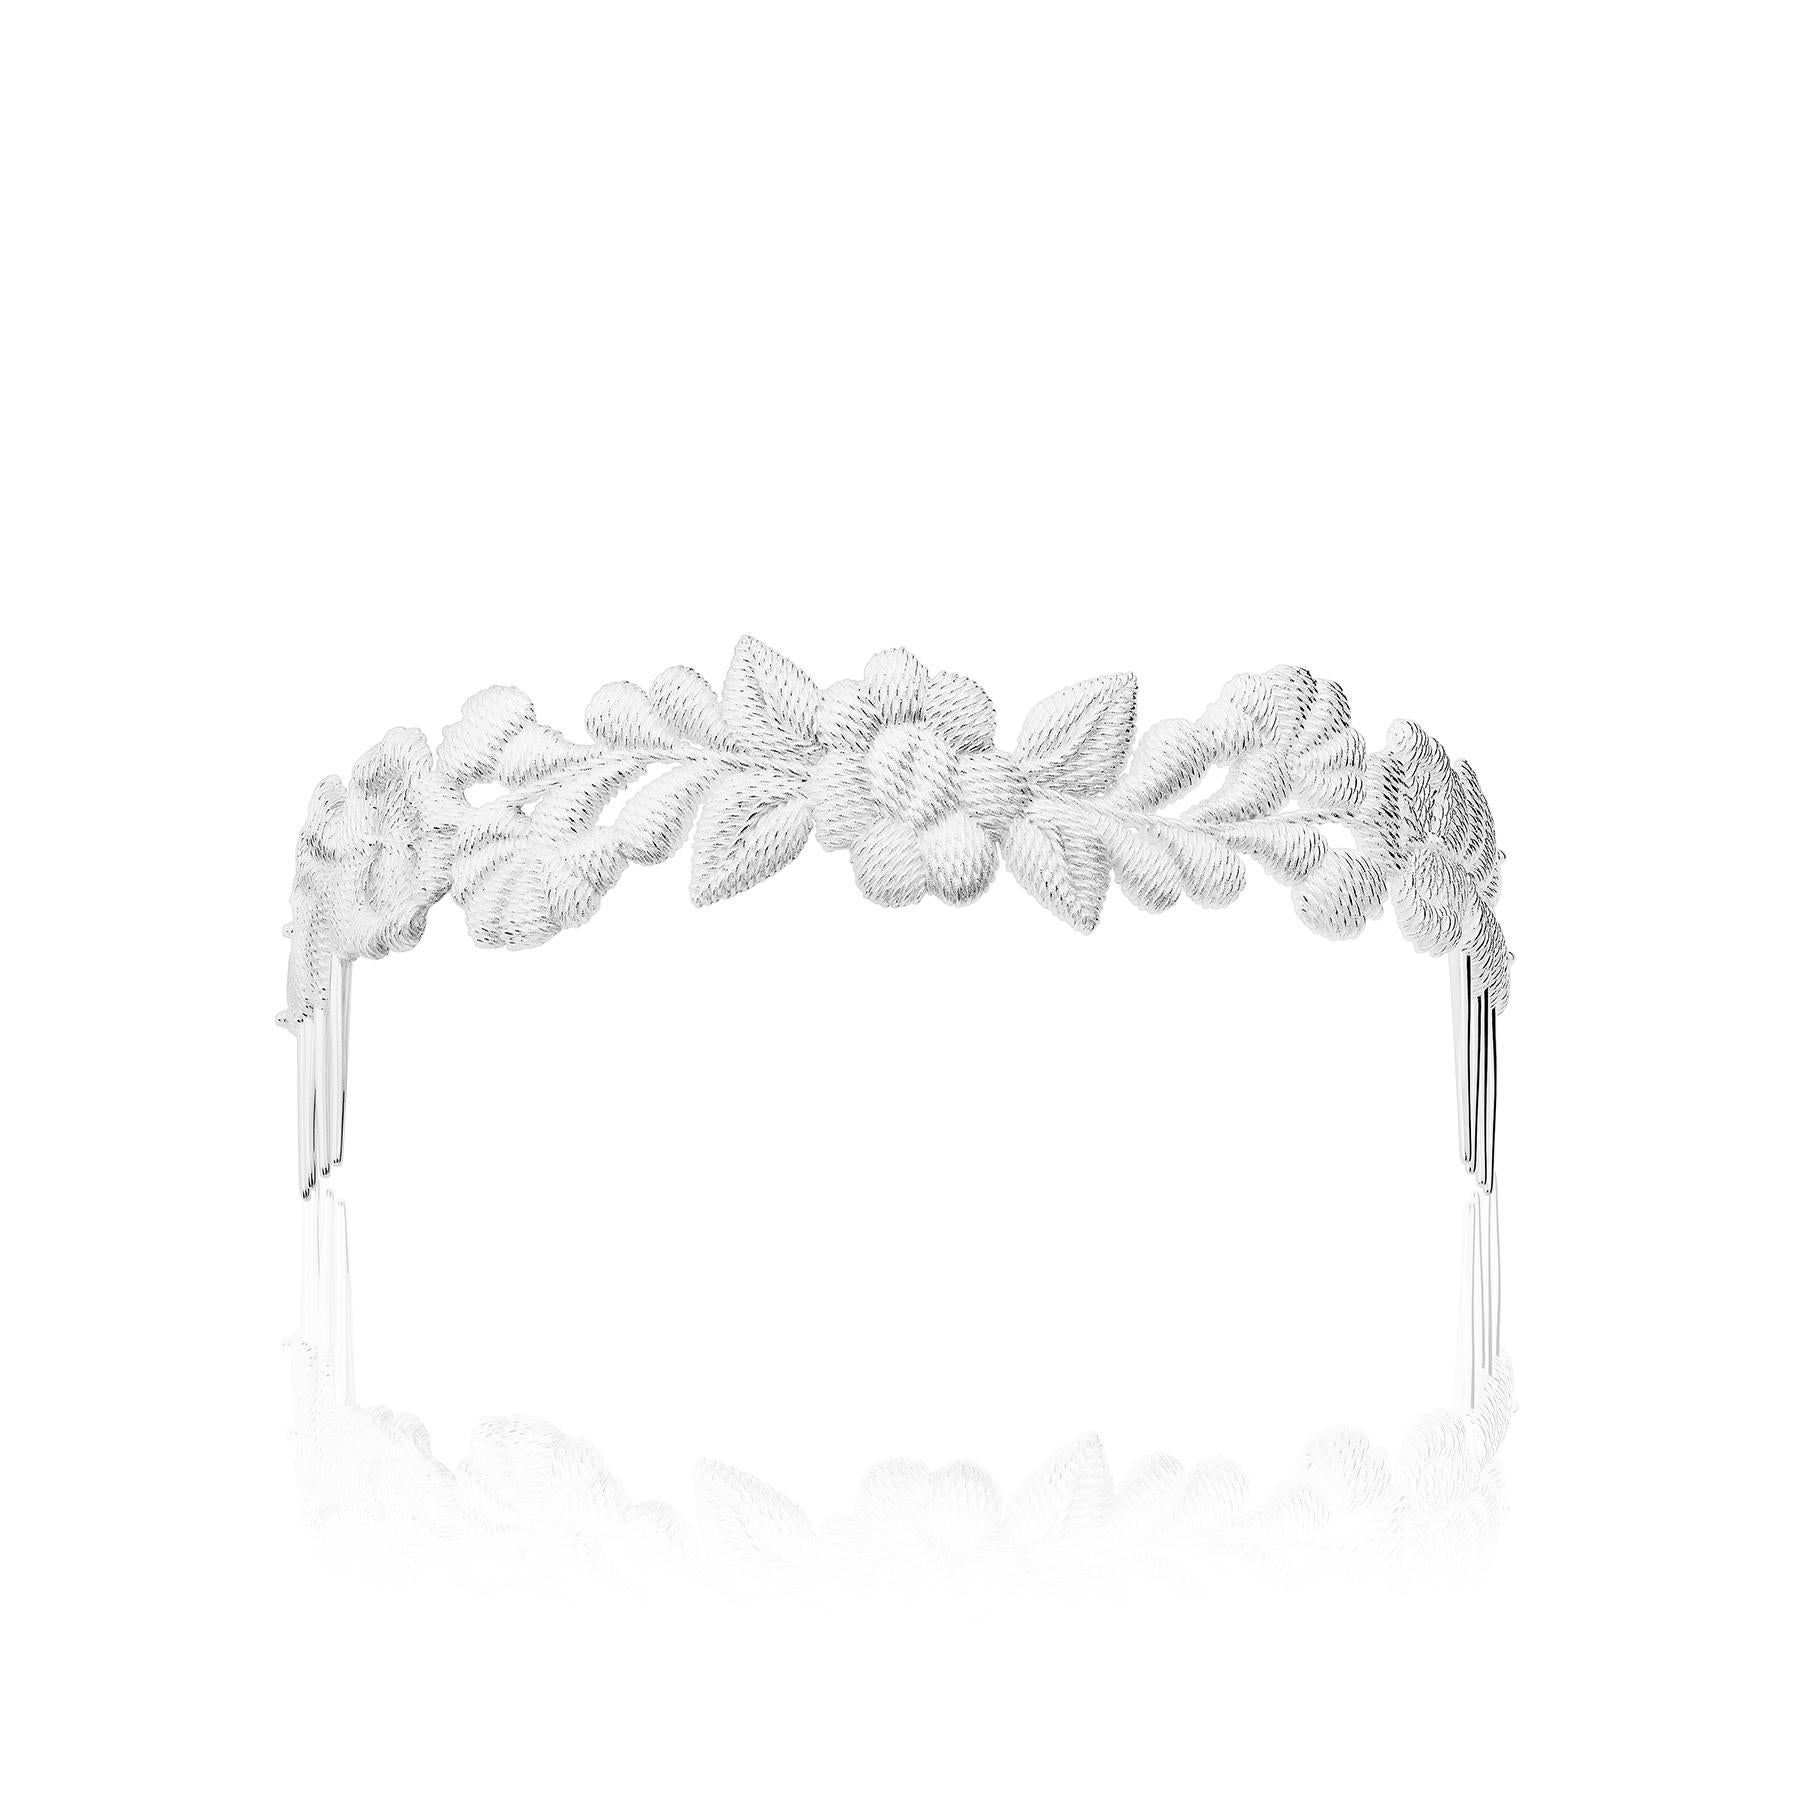 The Bordados Hair Comb from the Bordados Collection by TANE is handmade in sterling silver. The piece takes the original shapes and textures of one of the embroideries made for the collection and separates them from the textile that originally